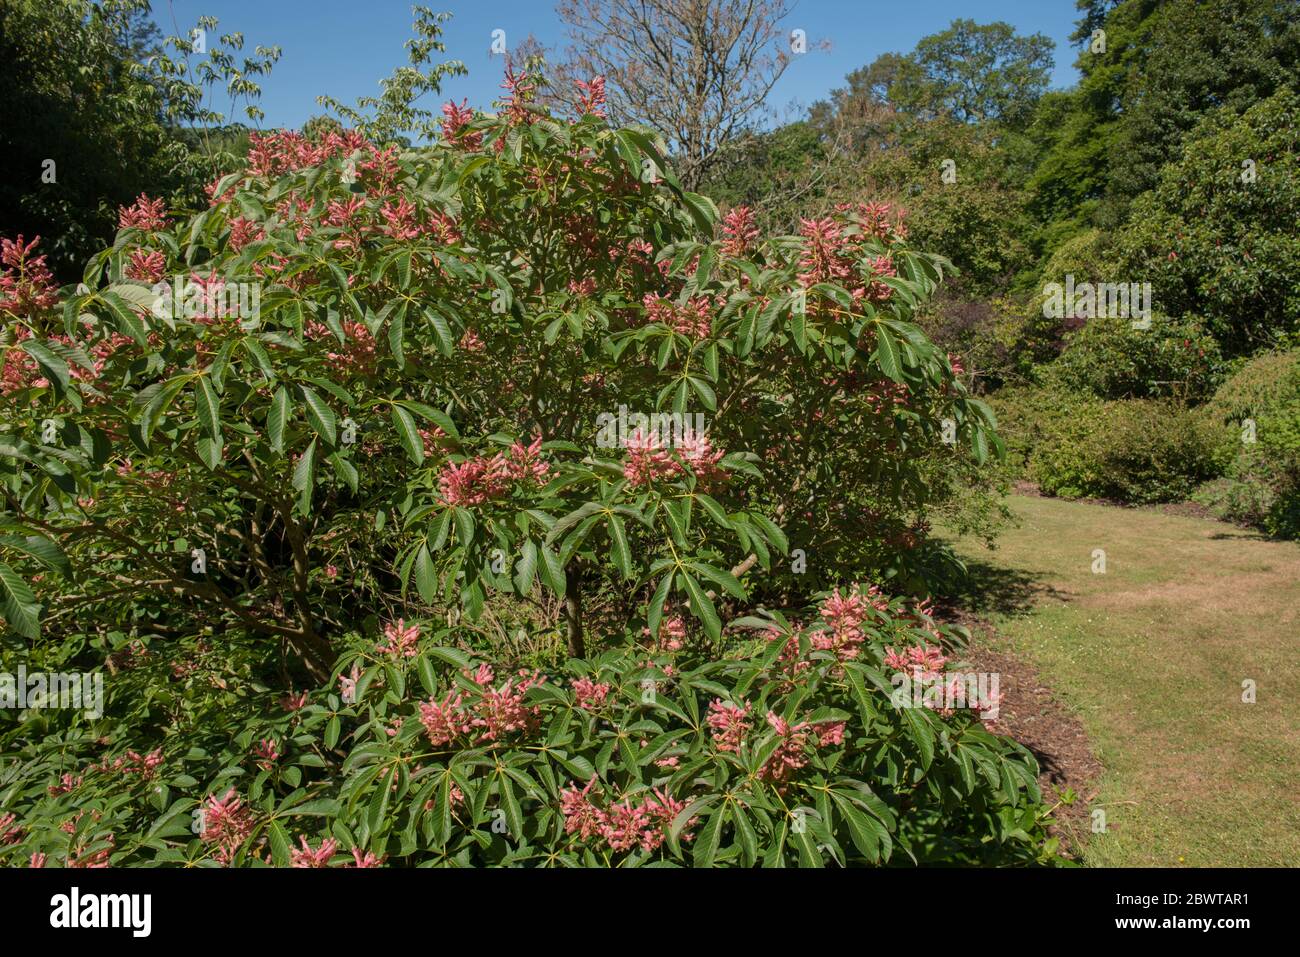 Spring Flowers of the Deciduous Red Buckeye Tree (Aesculus pavia 'Rosea nana') Growing in a Garden in Rural Devon, England, UK Stock Photo